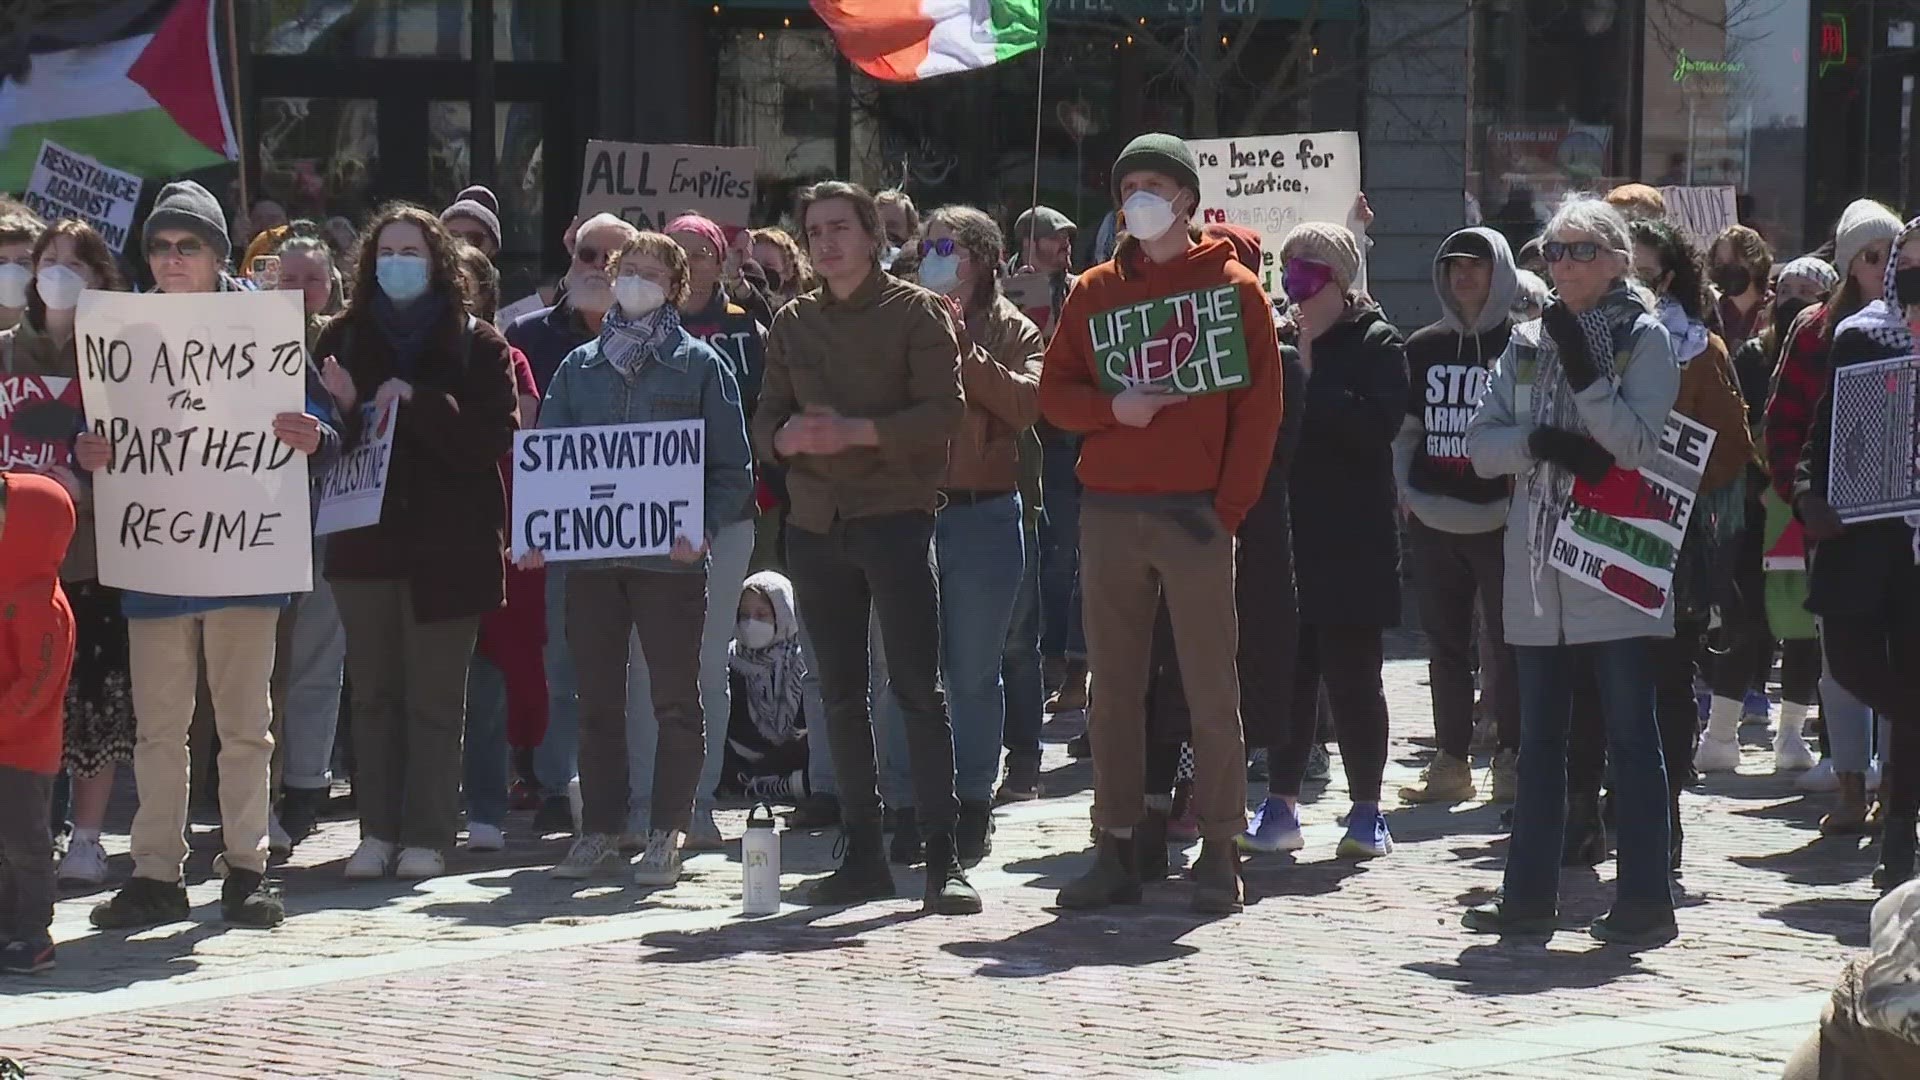 The Maine Coalition for Palestine organized the event that began in Monument Square Saturday afternoon.